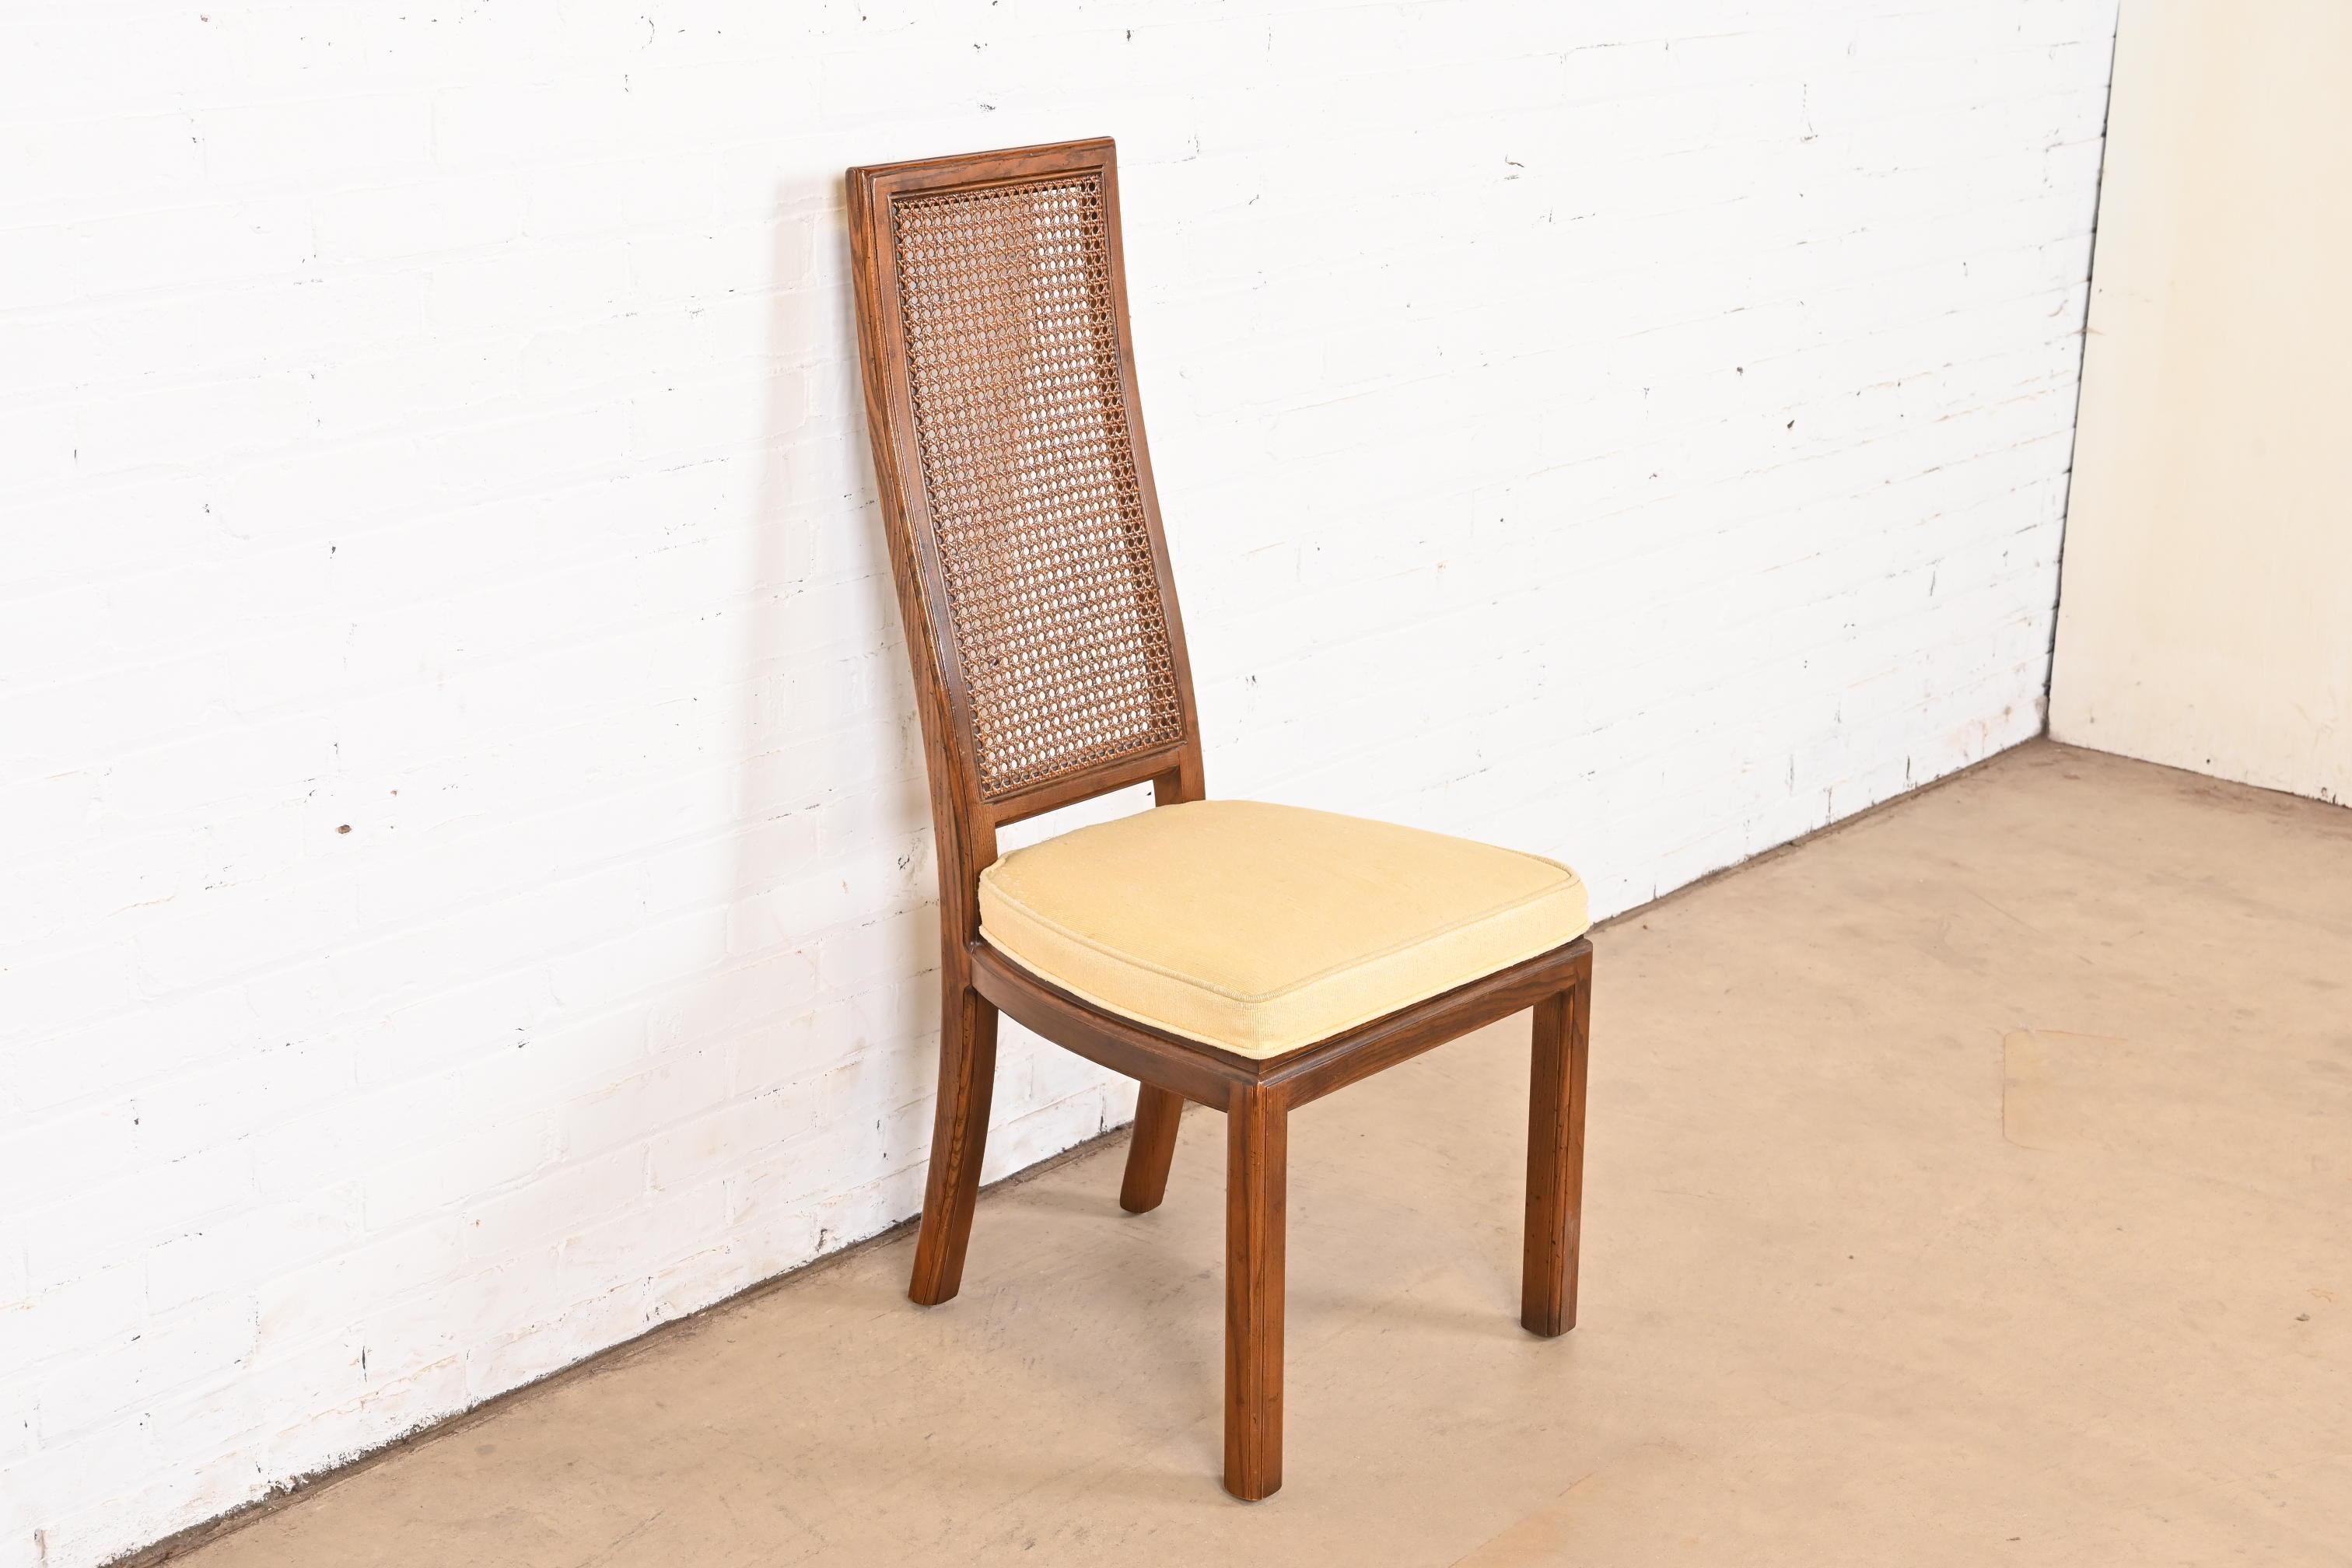 Upholstery Henredon Mid-Century Modern Oak and Cane High Back Side Chair, Circa 1970s For Sale